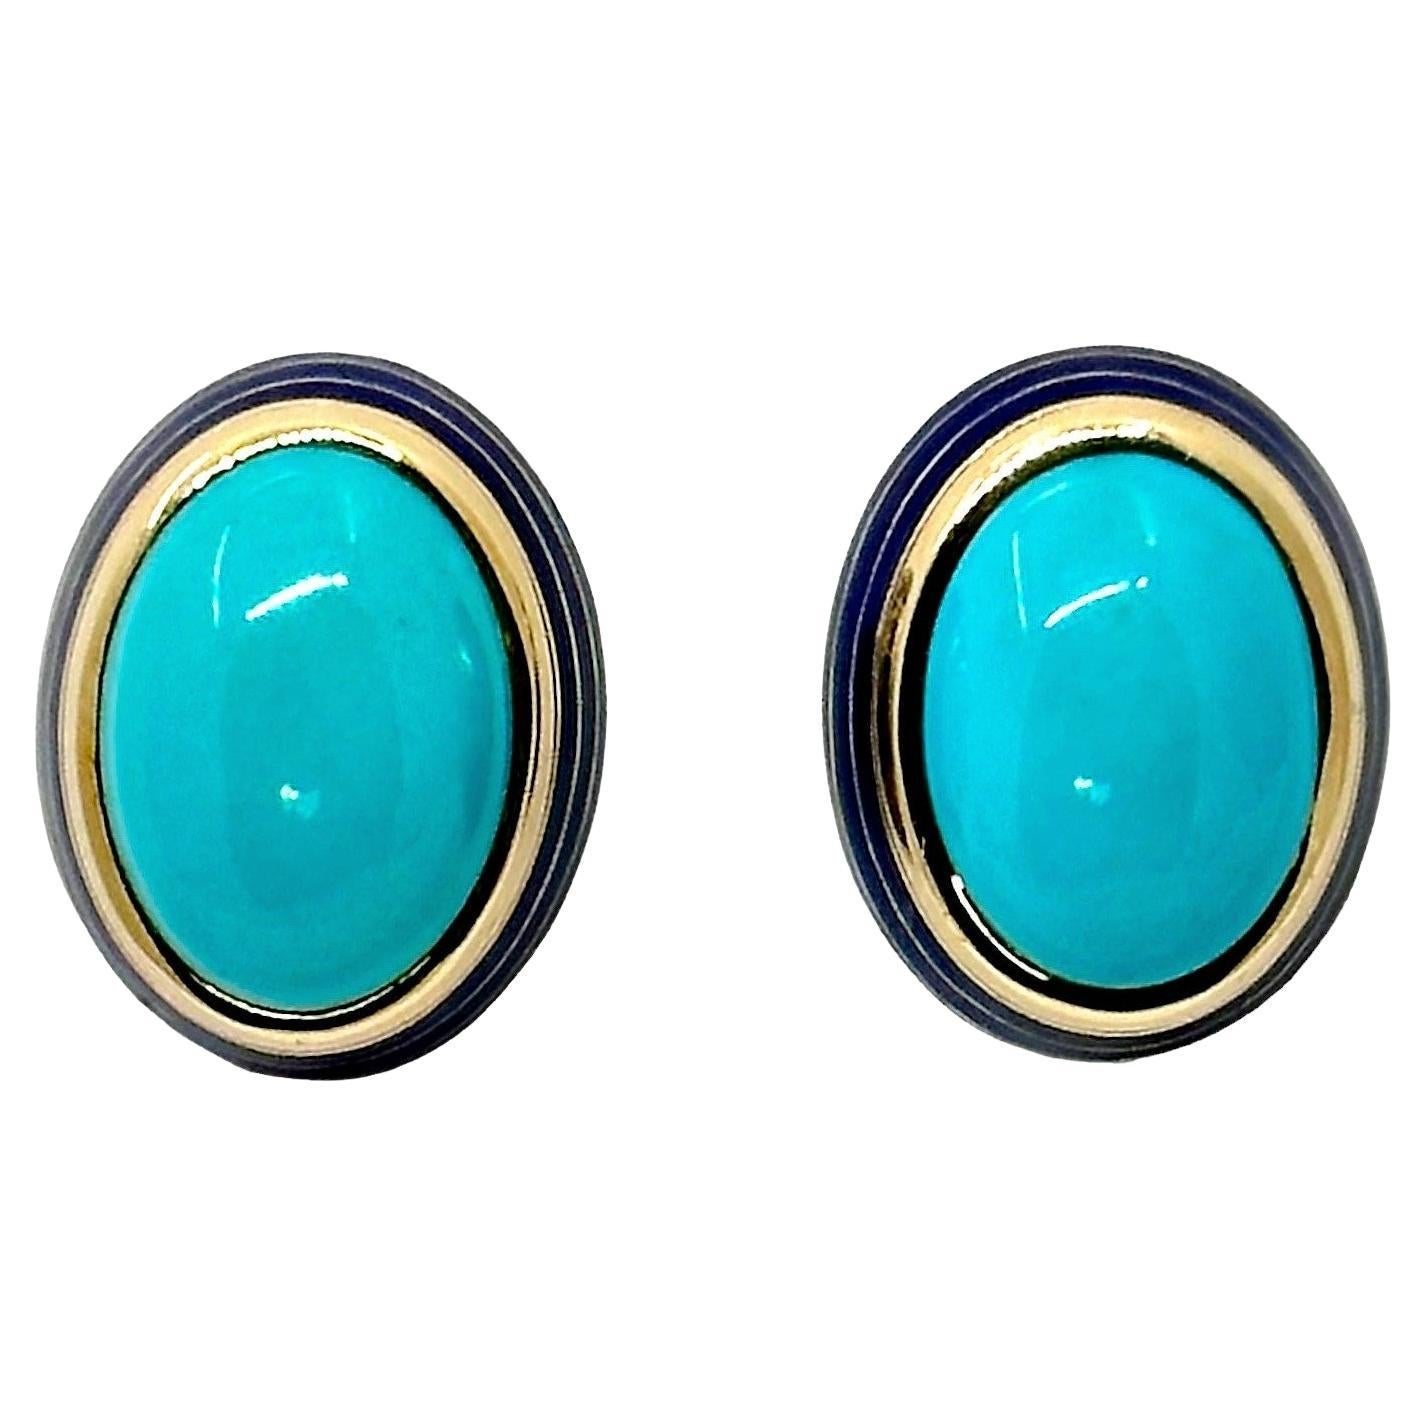 This very tasteful pair of 18K yellow gold earrings are deftly designed. At the center of each is a natural turquoise measuring over 3/4 inches in length and  just under 5/8 inches inches in width. The overall measurement of the earrings is 1 inch